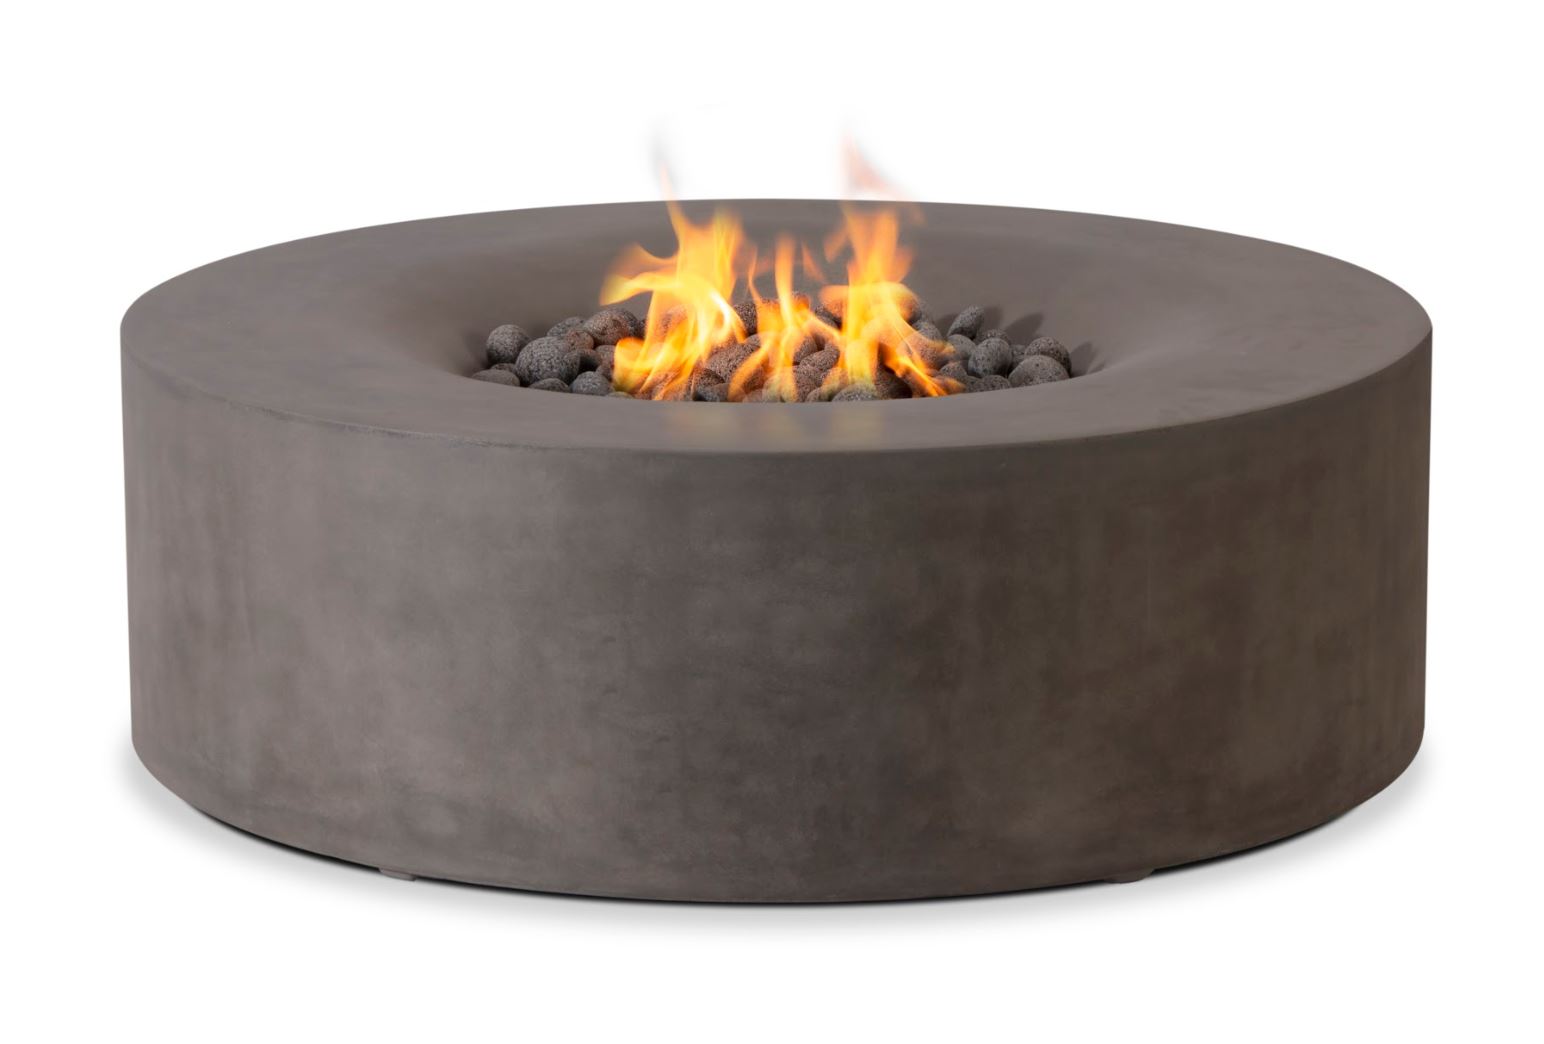 Avalon Fire Table - The Professional Line